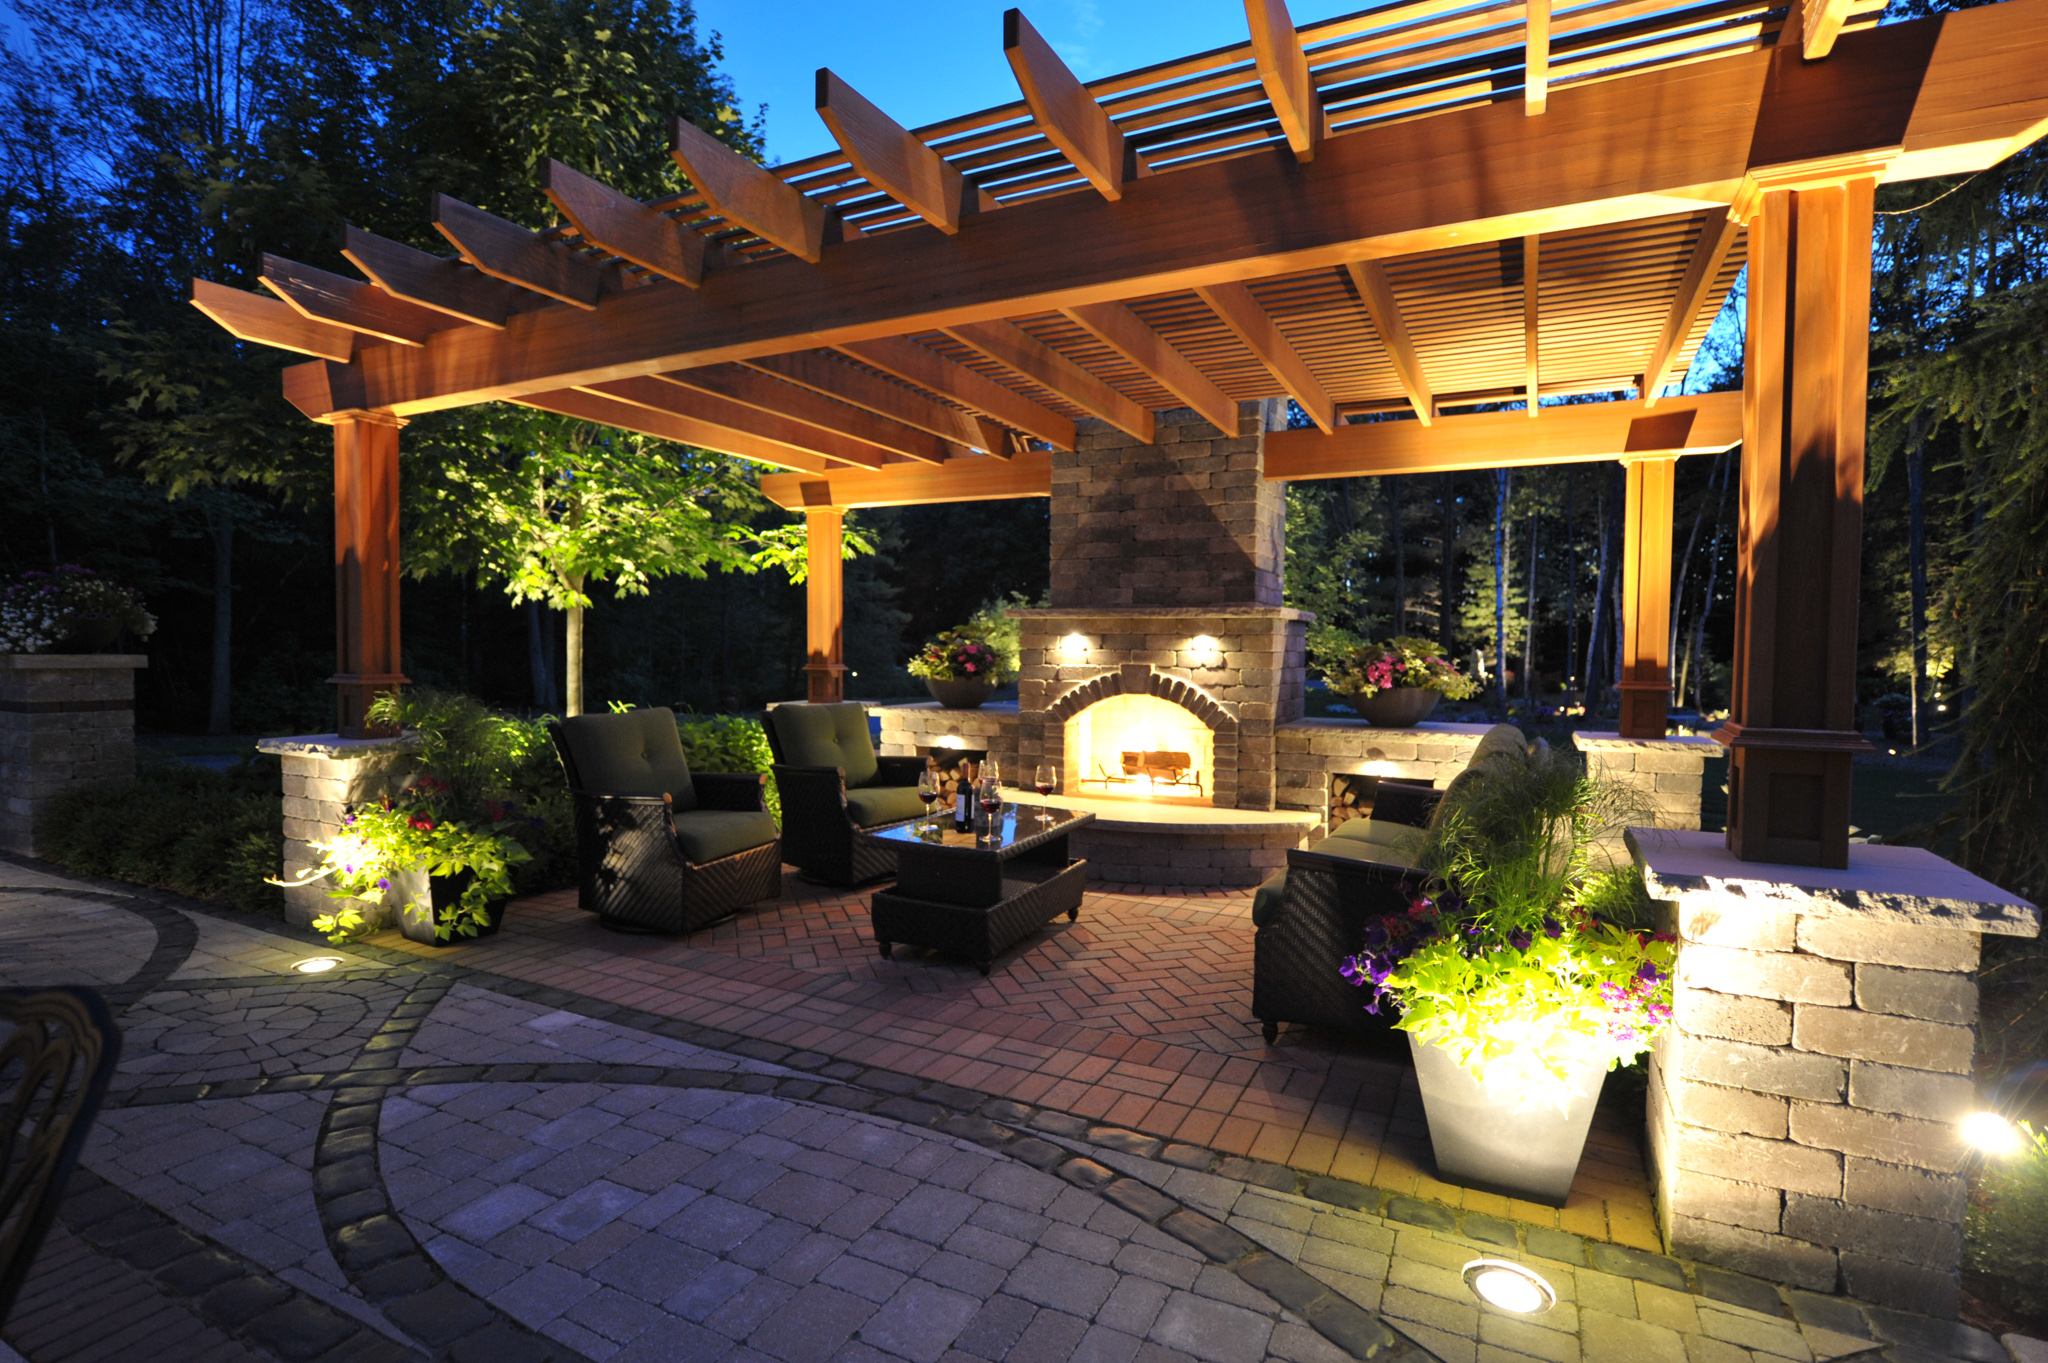 20 Best Design Ideas For Patio Landscape Lighting Home Decoration And